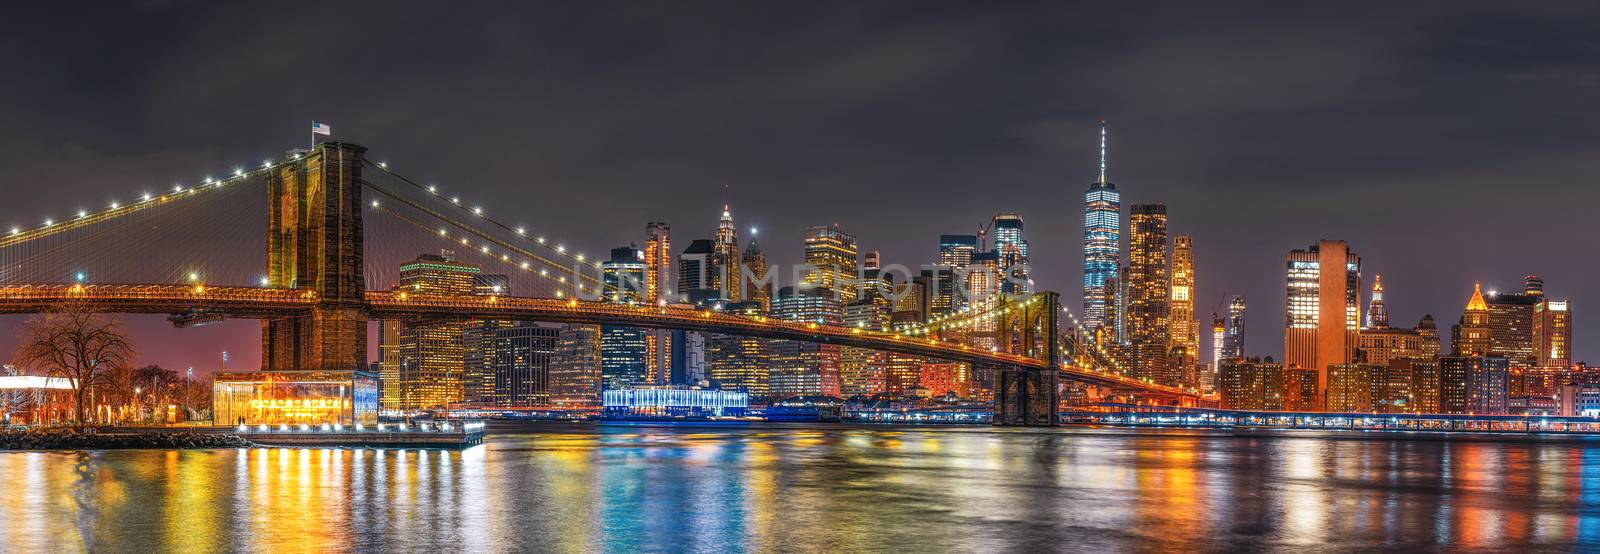 Panorama scene of New york Cityscape with Brooklyn Bridge over t by Tzido